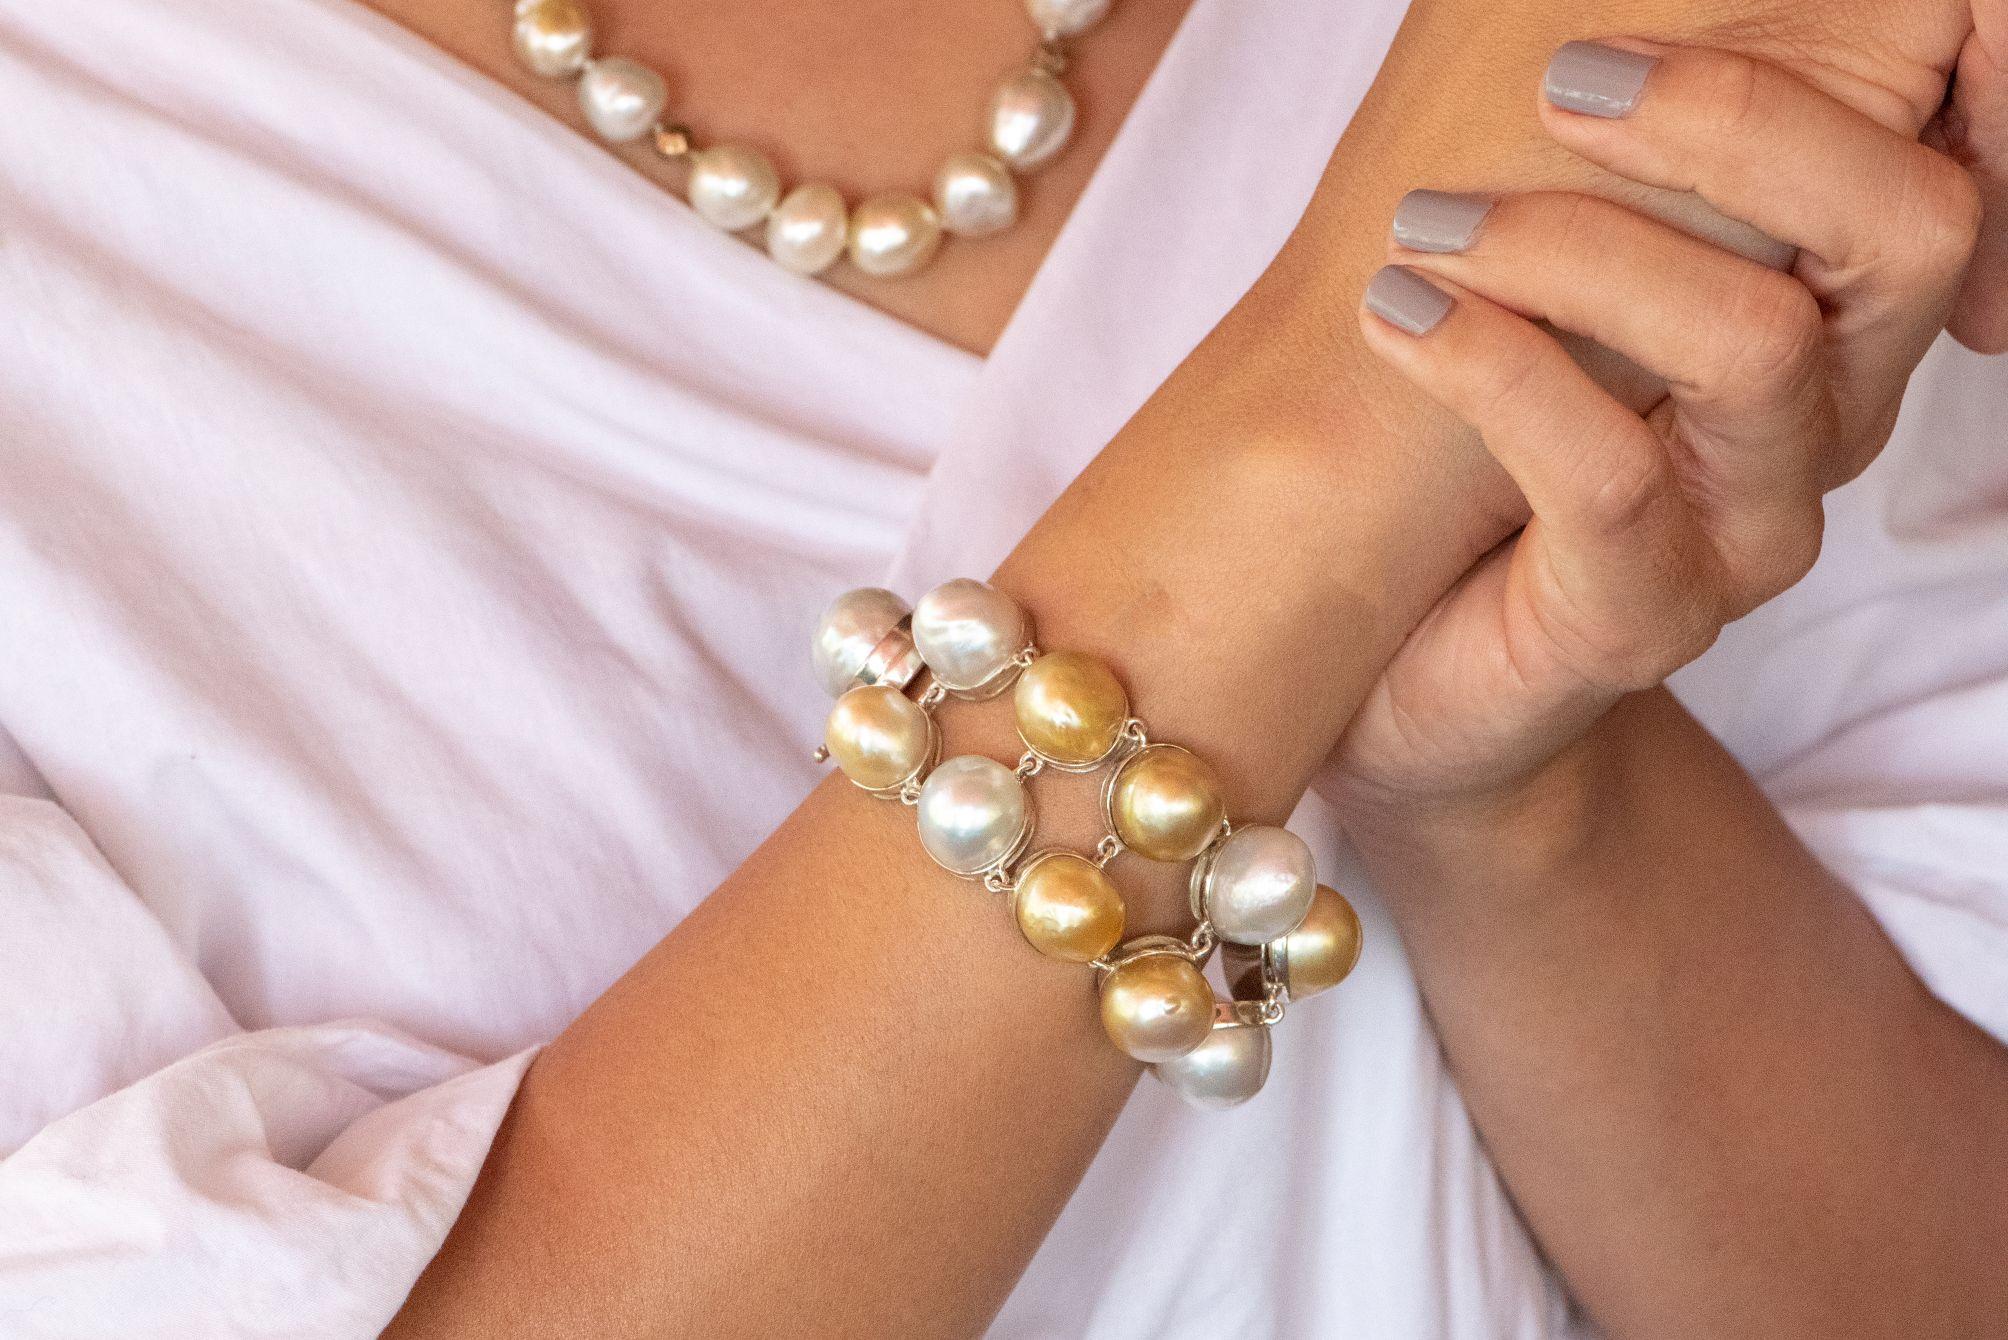 Sparkling white and deep gold 12 to 17 mm baroque south sea pearls jostle for attention in this gorgeous 19.2 by 3.5 cm sterling silver bracelet